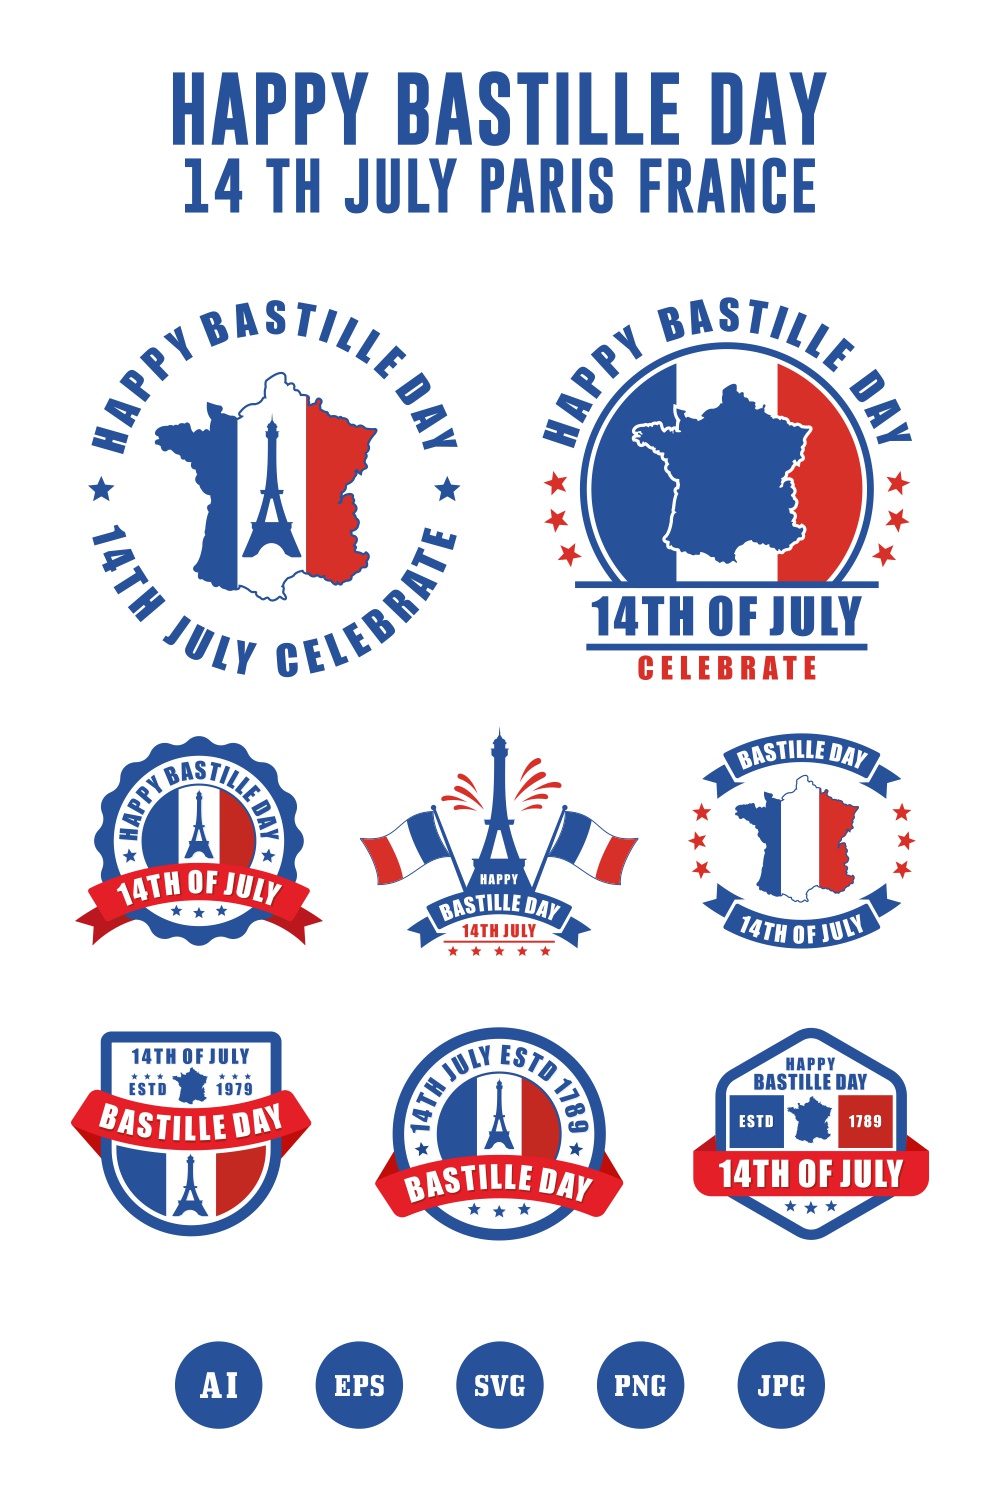 8 Happy Bastille Day 14 th July Paris France design collection - $6 pinterest preview image.